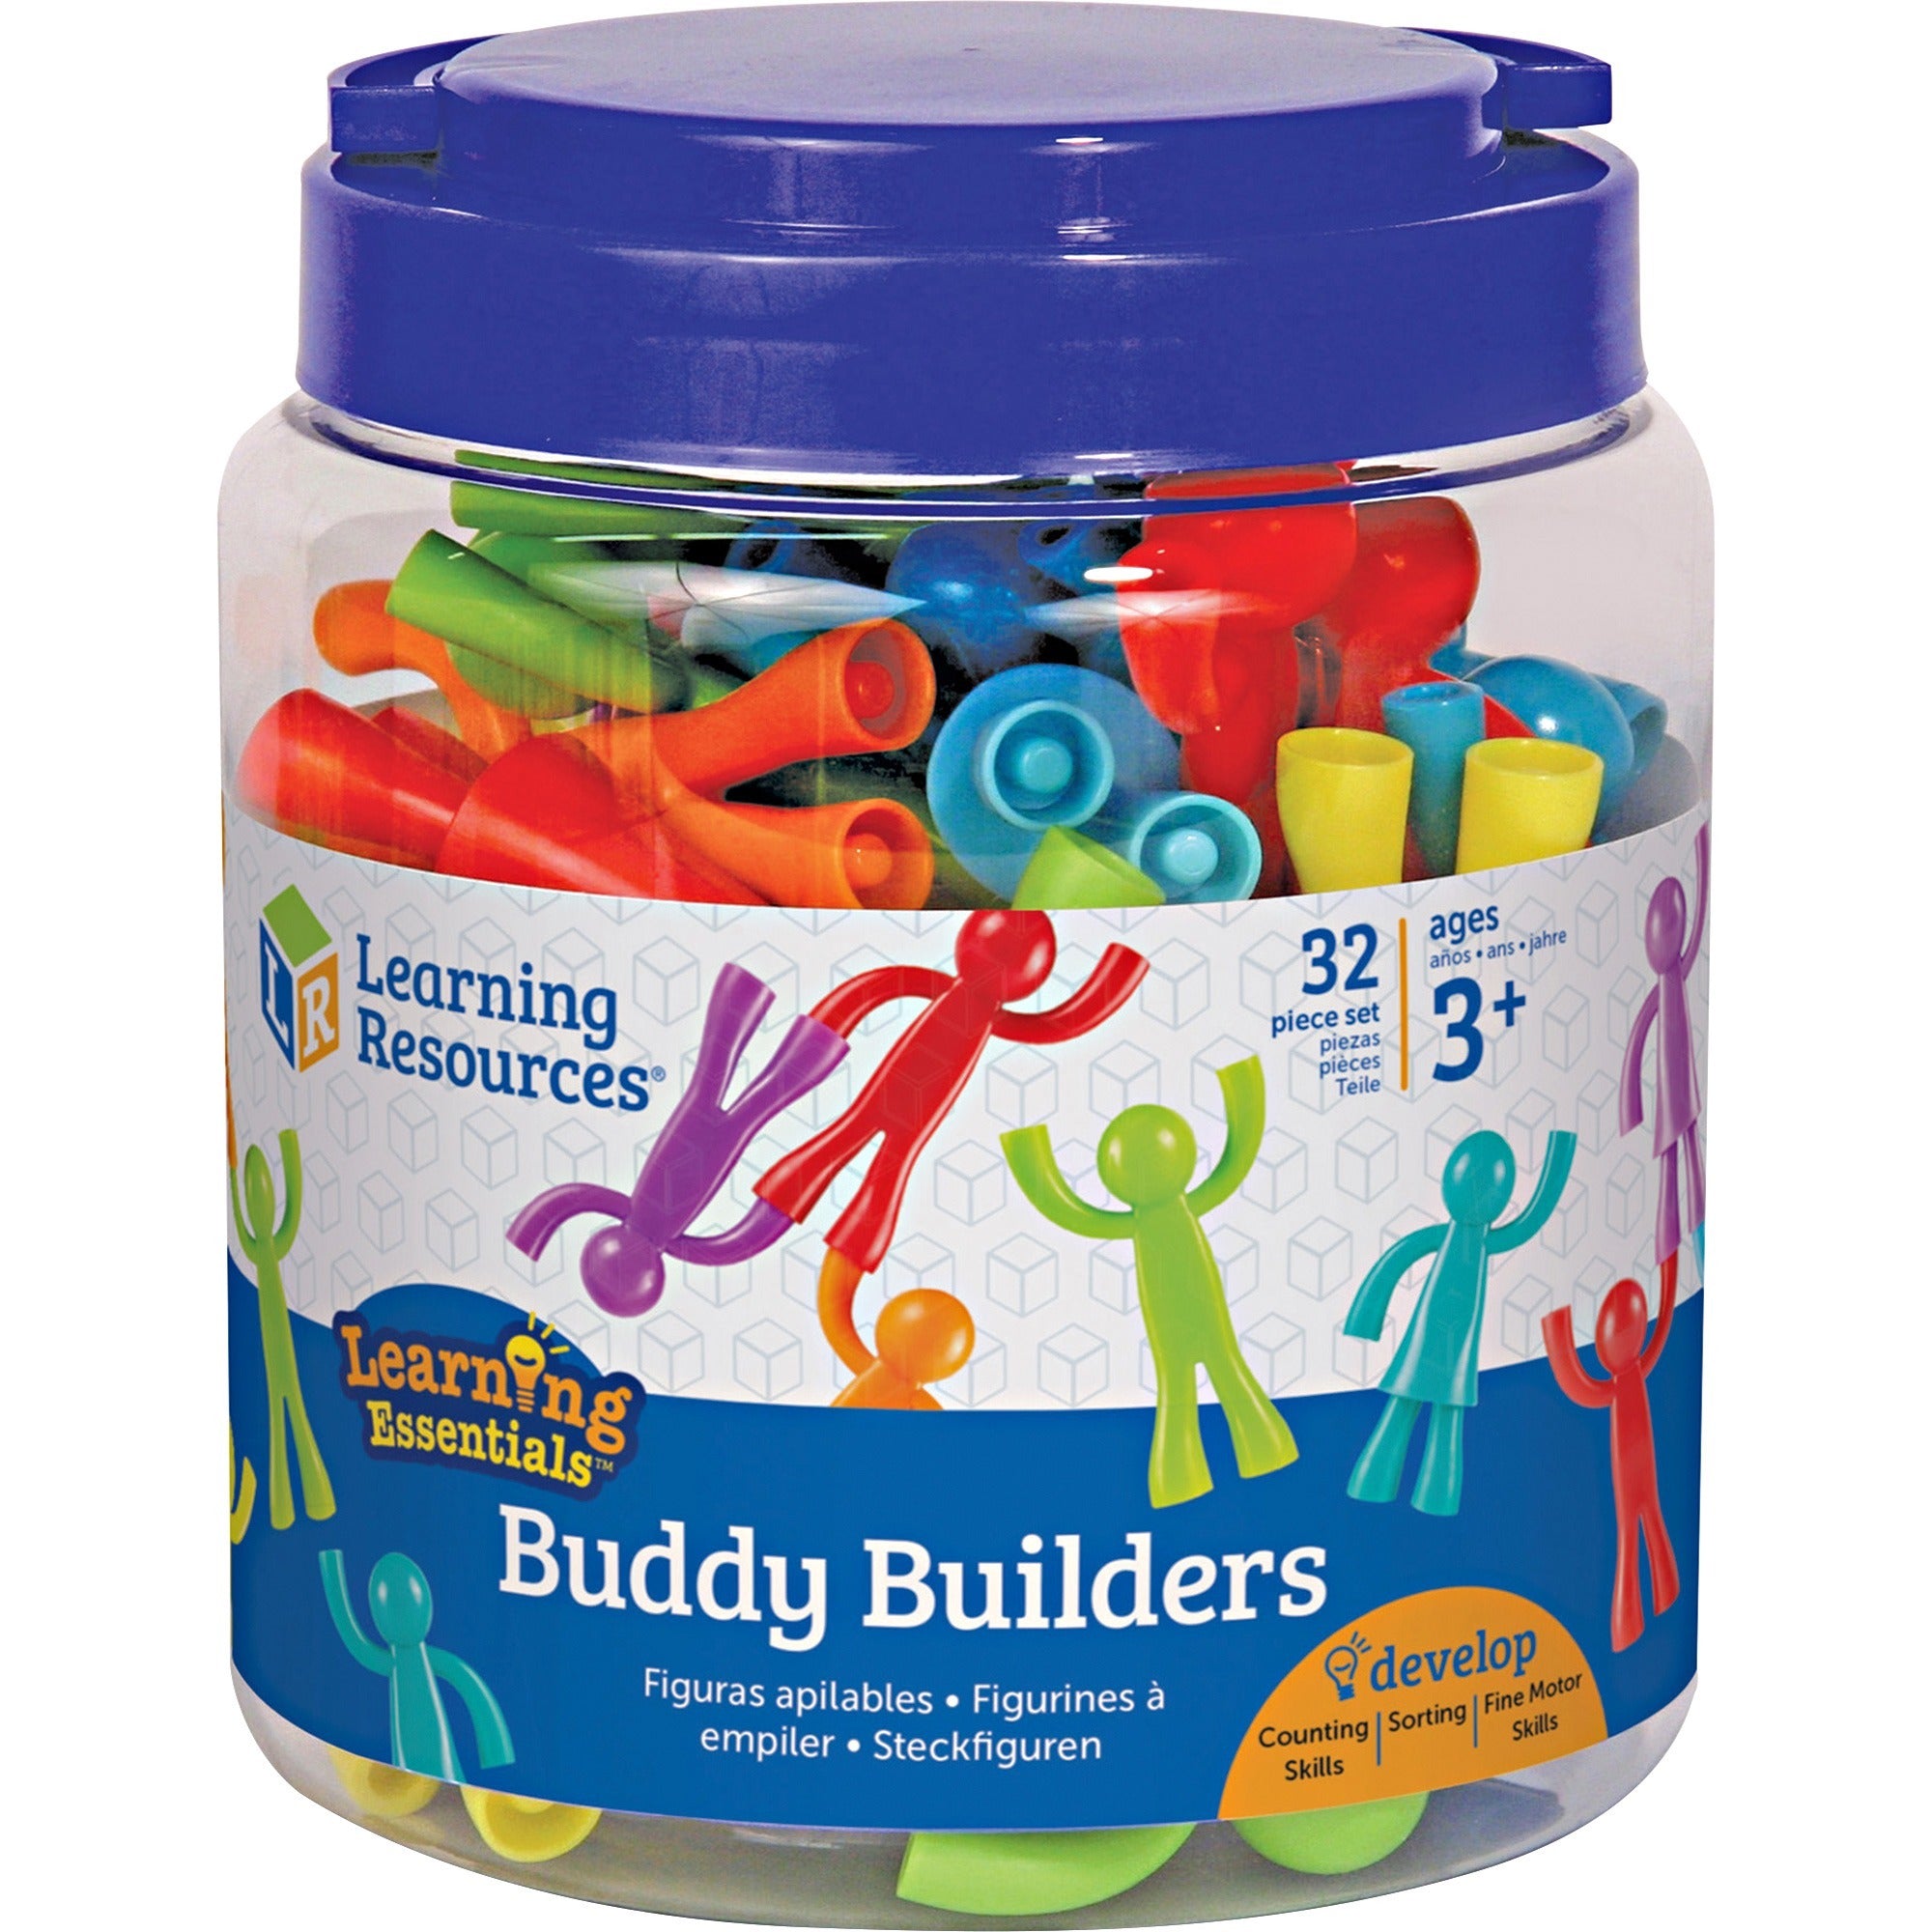 learning-resources-ages-3+-buddy-builders-set-skill-learning-eye-hand-coordination-motor-skills-visual-imagination-counting-sorting-color-matching-problem-solving-educational-grasping-motor-planning-3-year-&-up-32-pieces-multi_lrnler1081 - 1